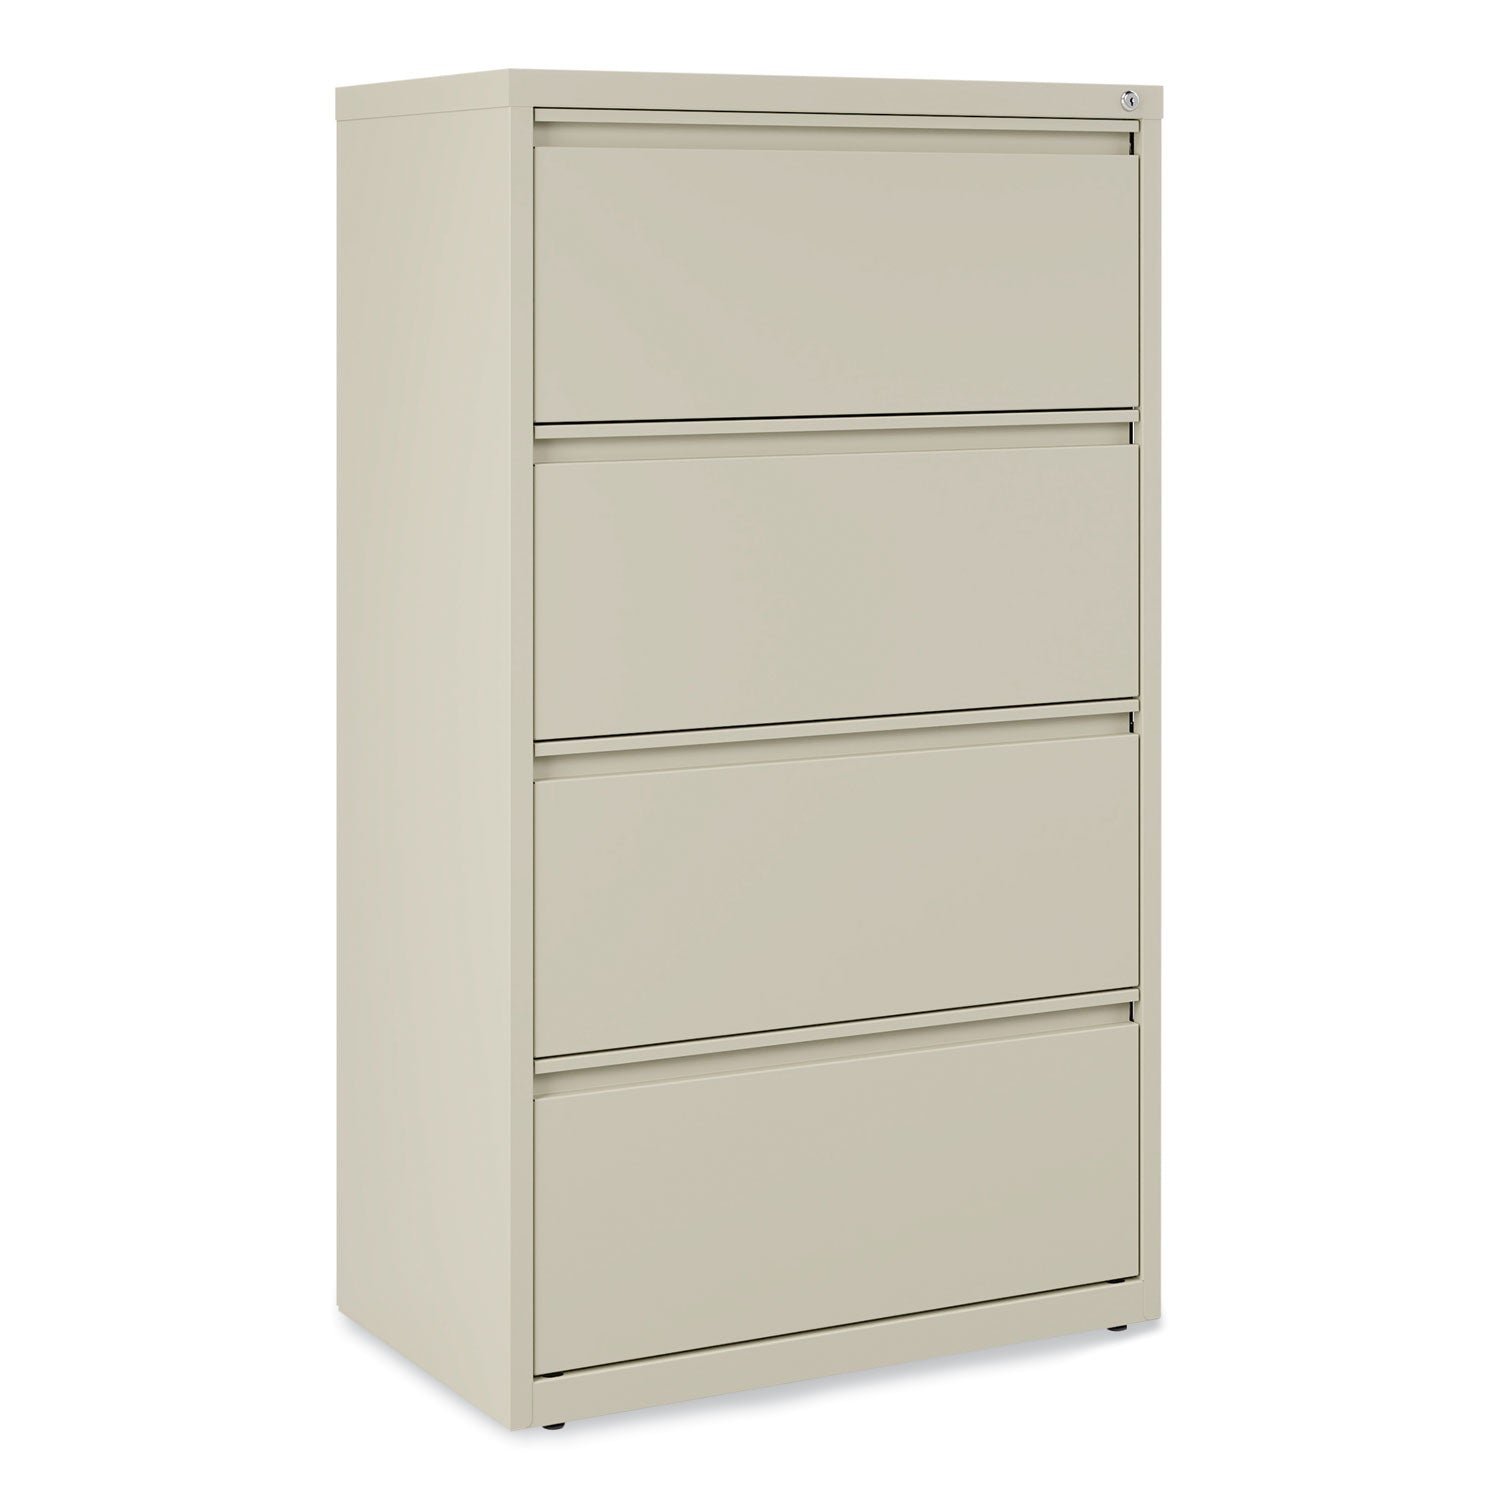 lateral-file-4-legal-letter-size-file-drawers-putty-30-x-1863-x-525_alehlf3054py - 2